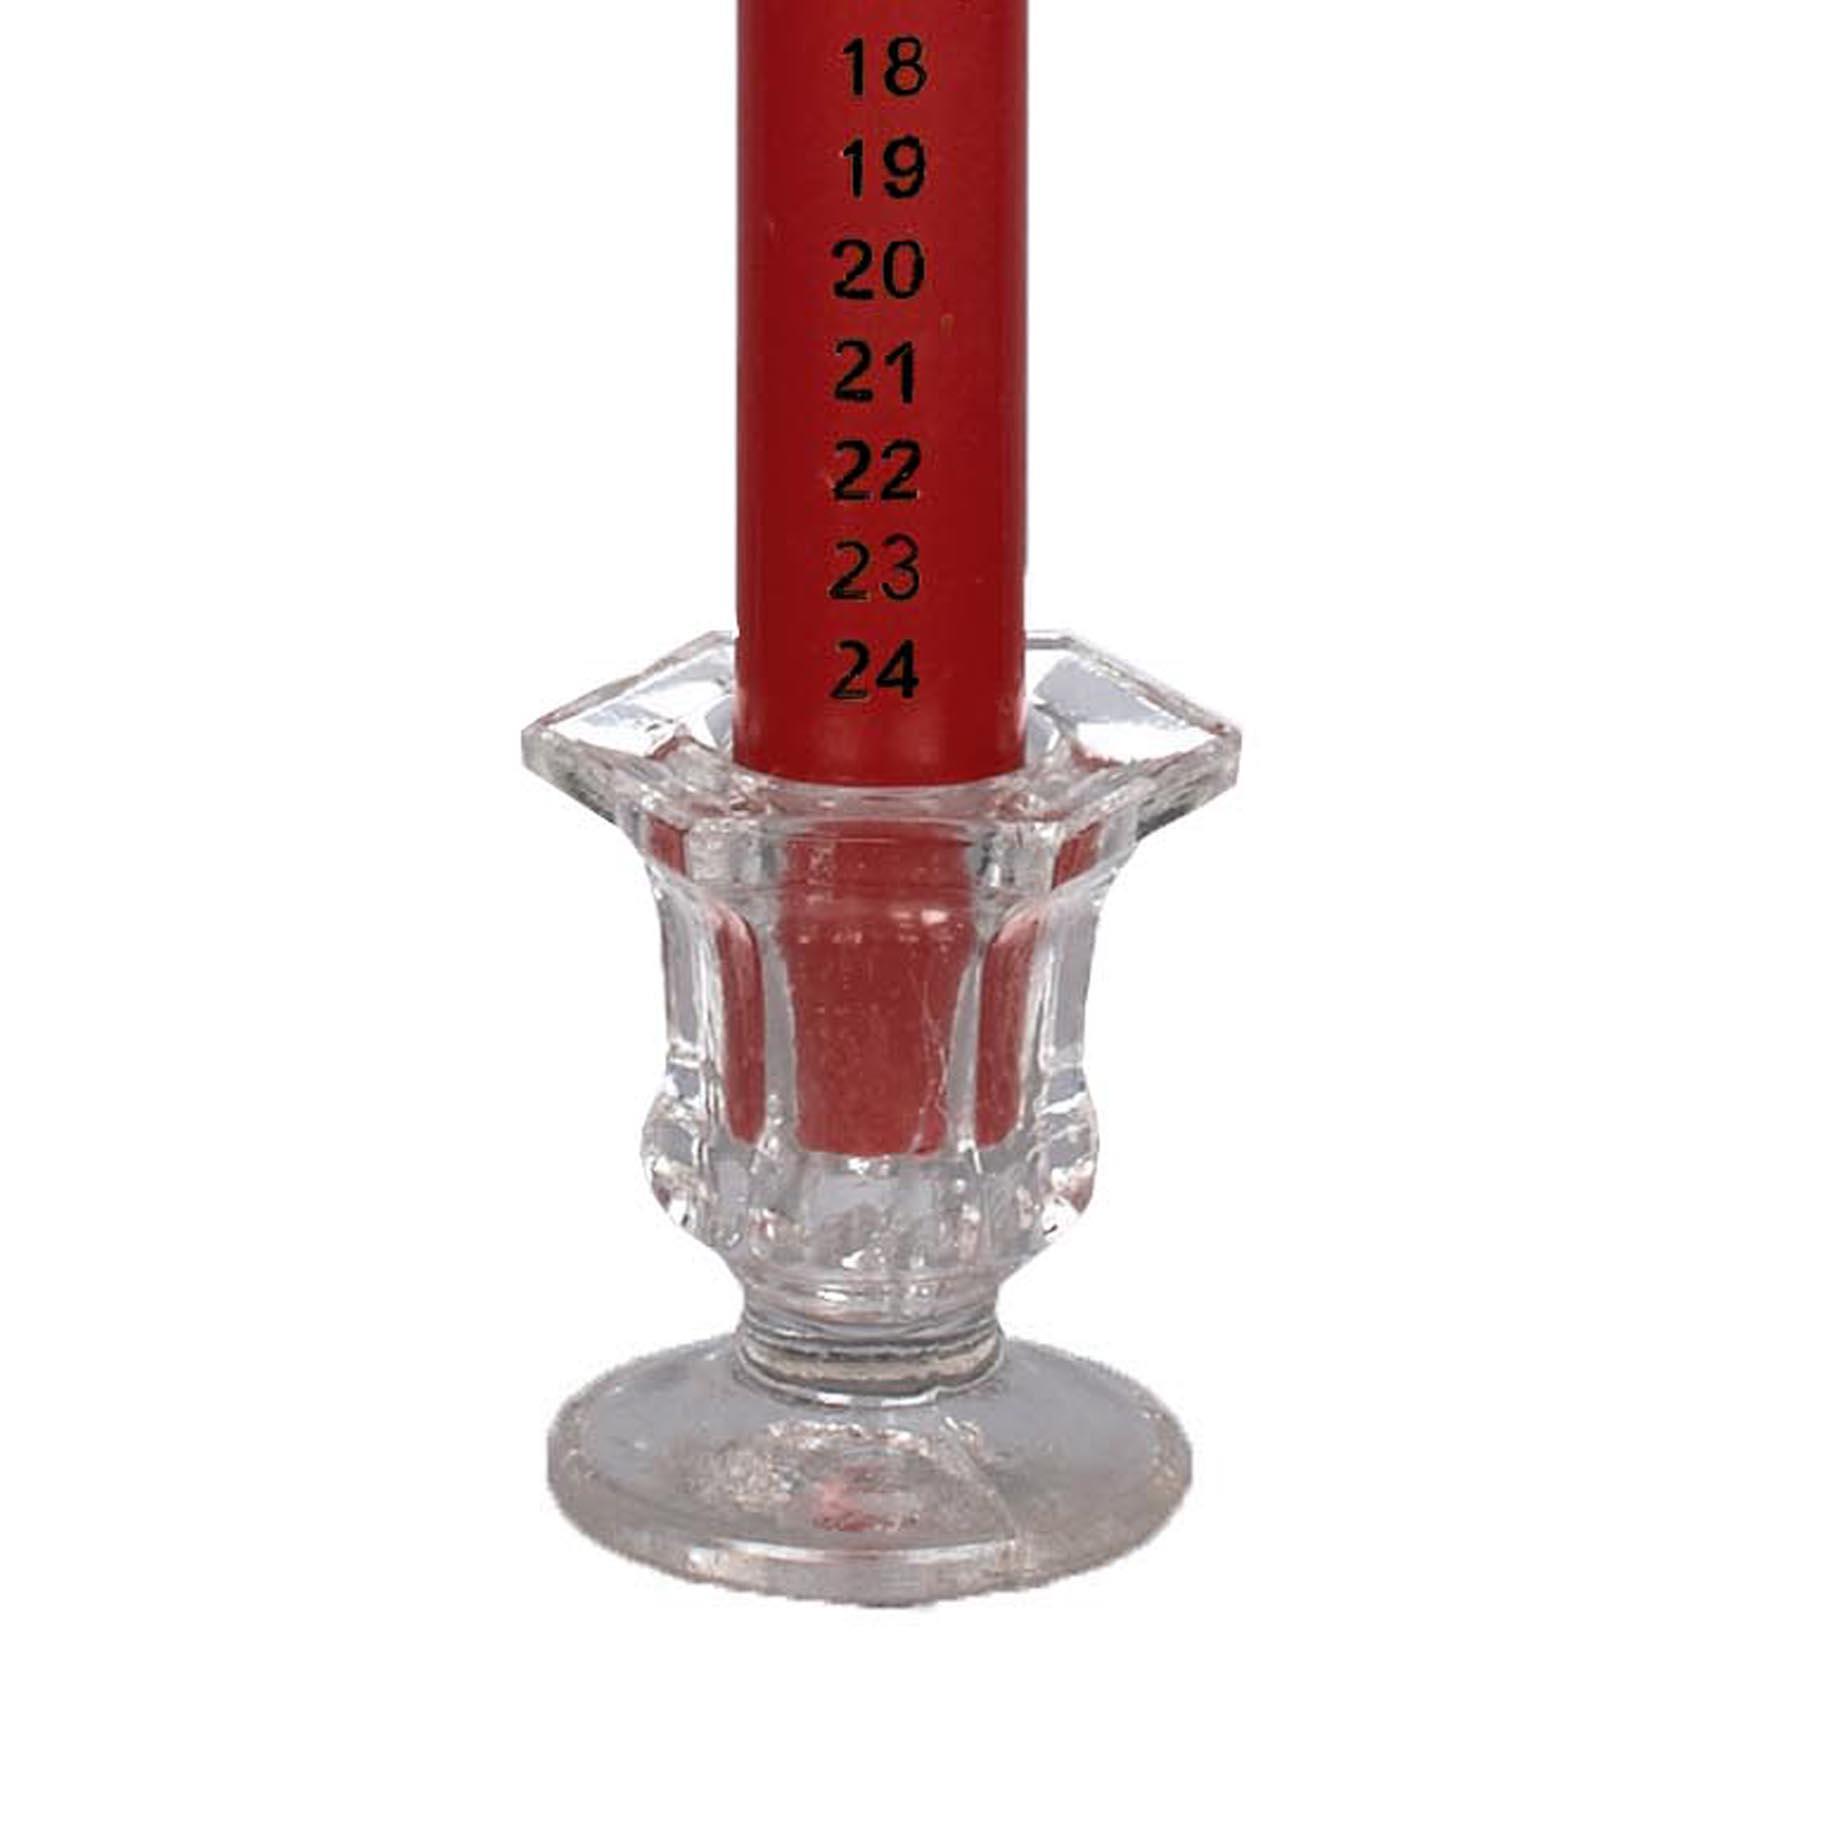 25cm Countdown to Christmas Advent Candle in Clear Glass Holder - Red